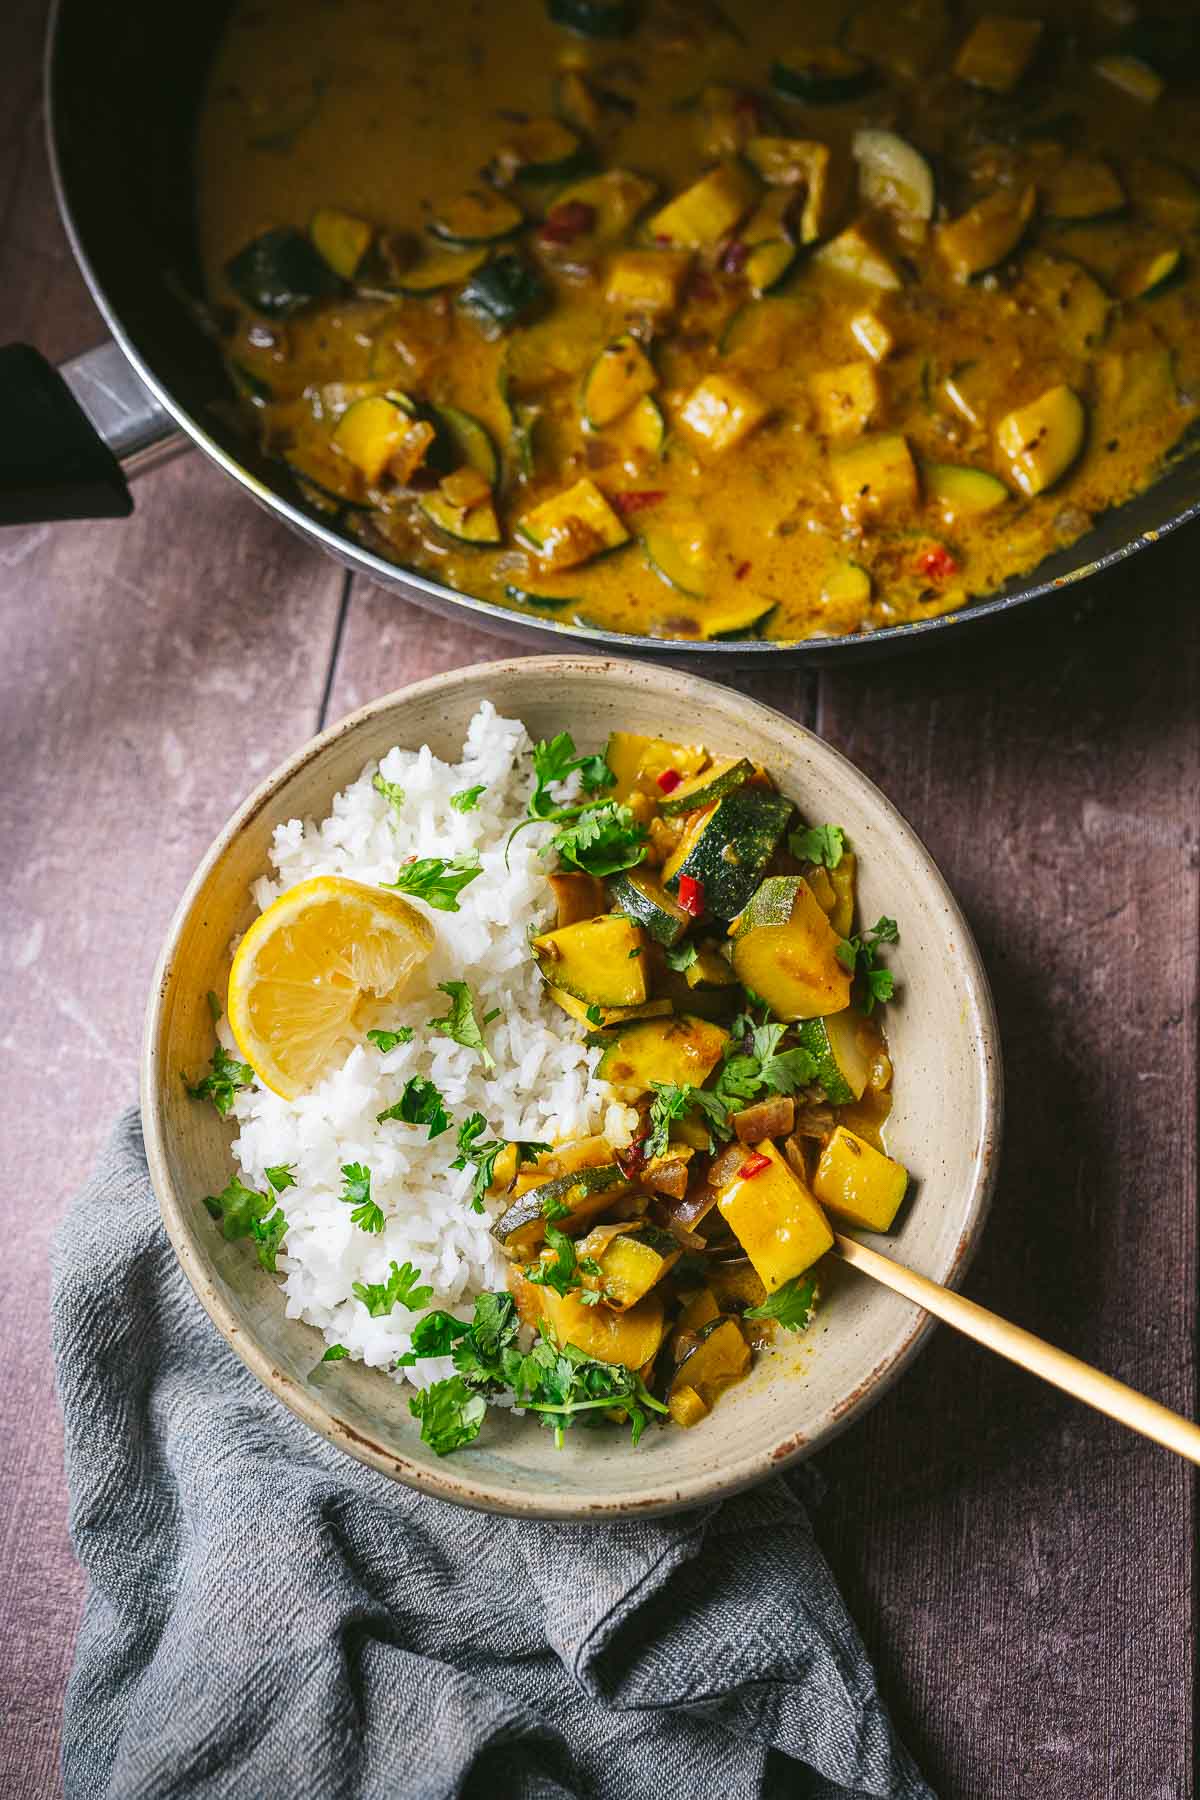 A bowl of curry and rice rests next to a large pan filled with curry.